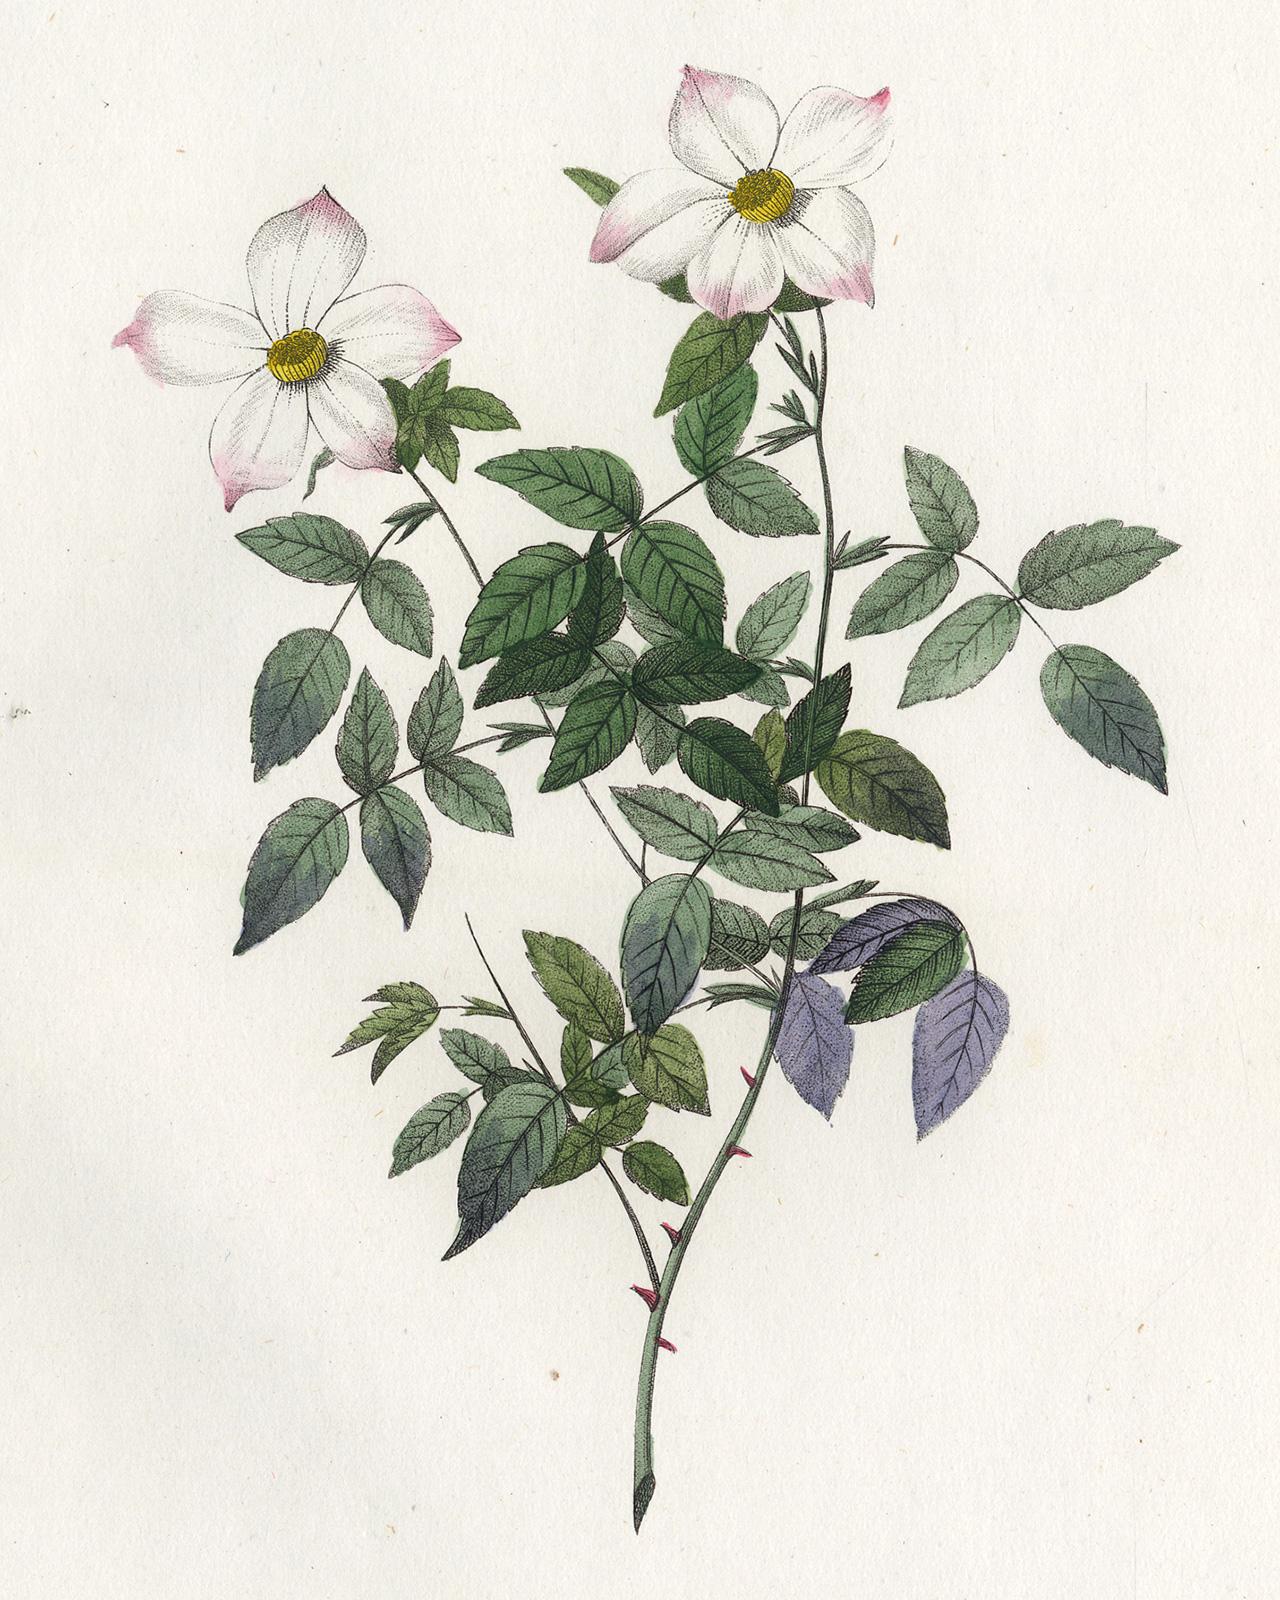 Rosa Acuminata by Redoute - Les Roses - Handcoloured engraving - 19th century - Print by Pierre-Joseph Redouté